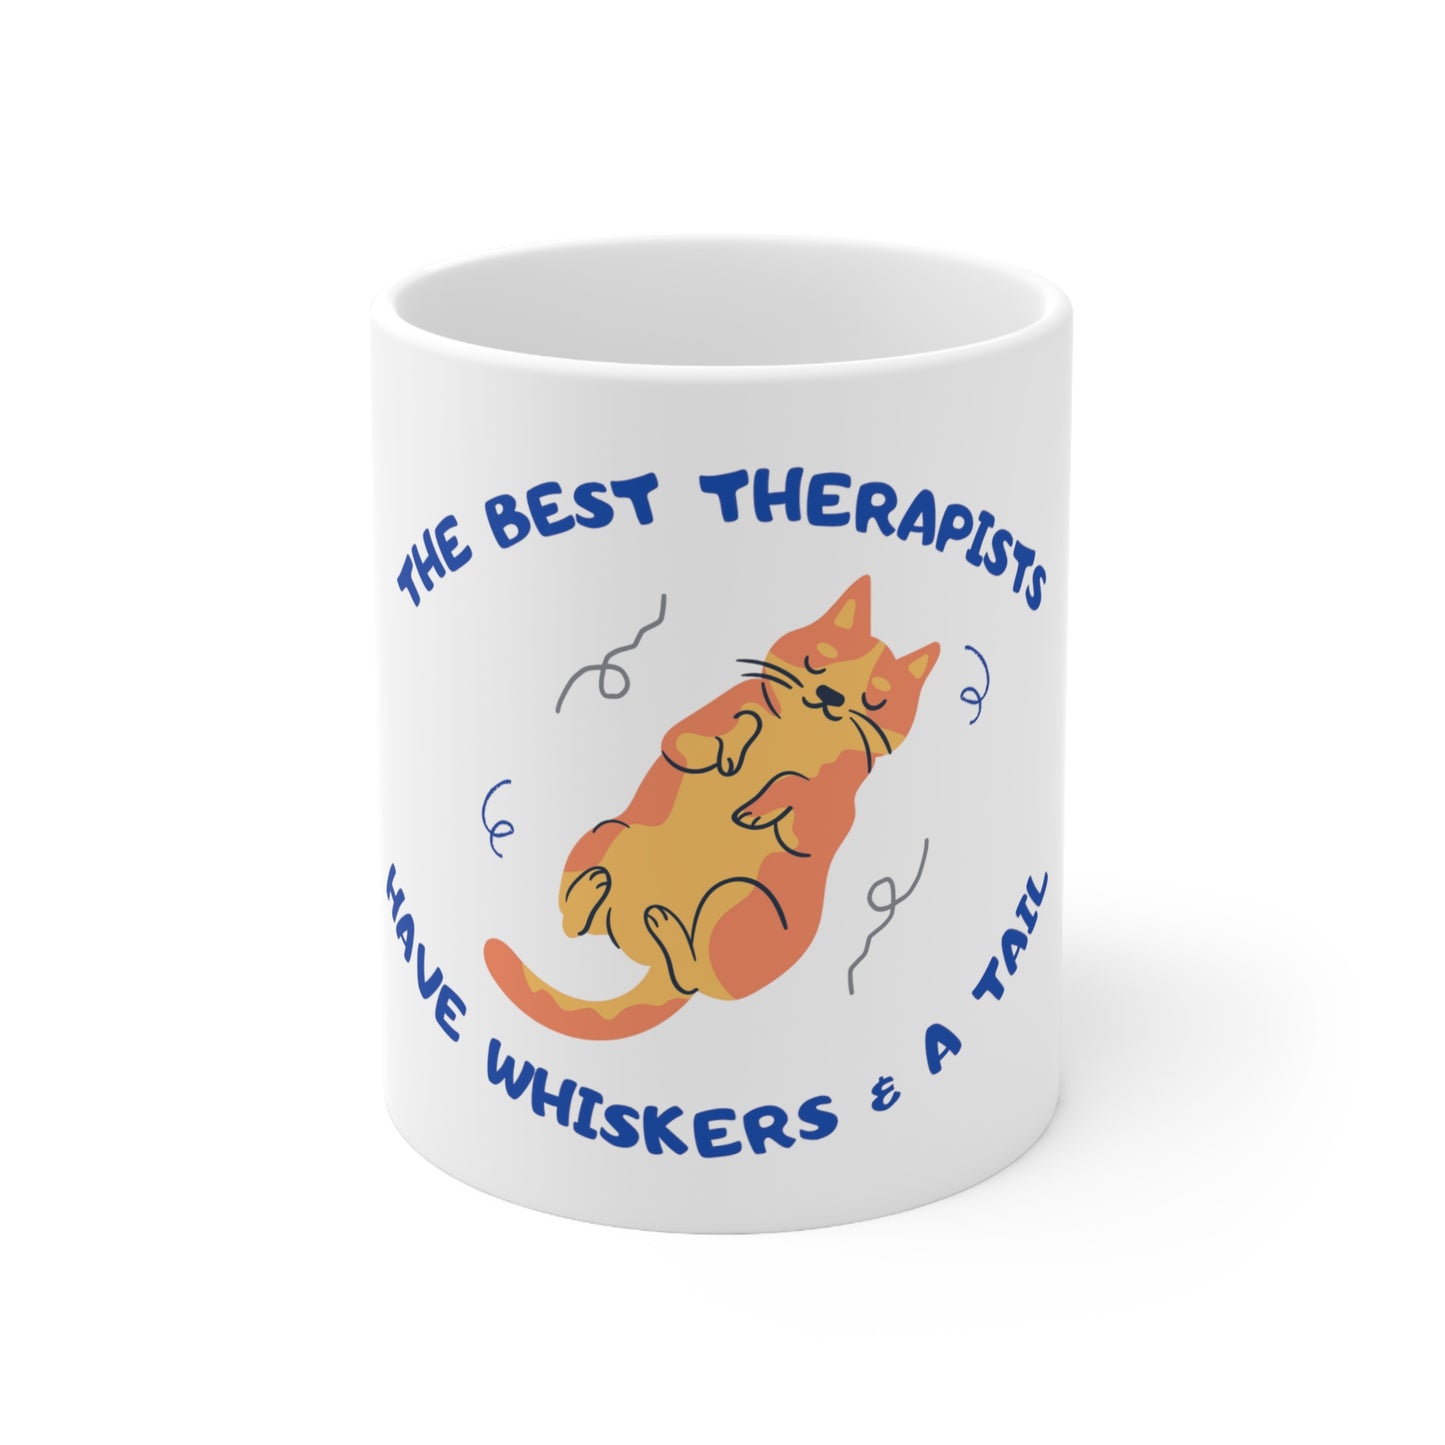 Cat Lady Coffee Mug - "Best Therapists Have Whiskers" - Ceramic- 11oz